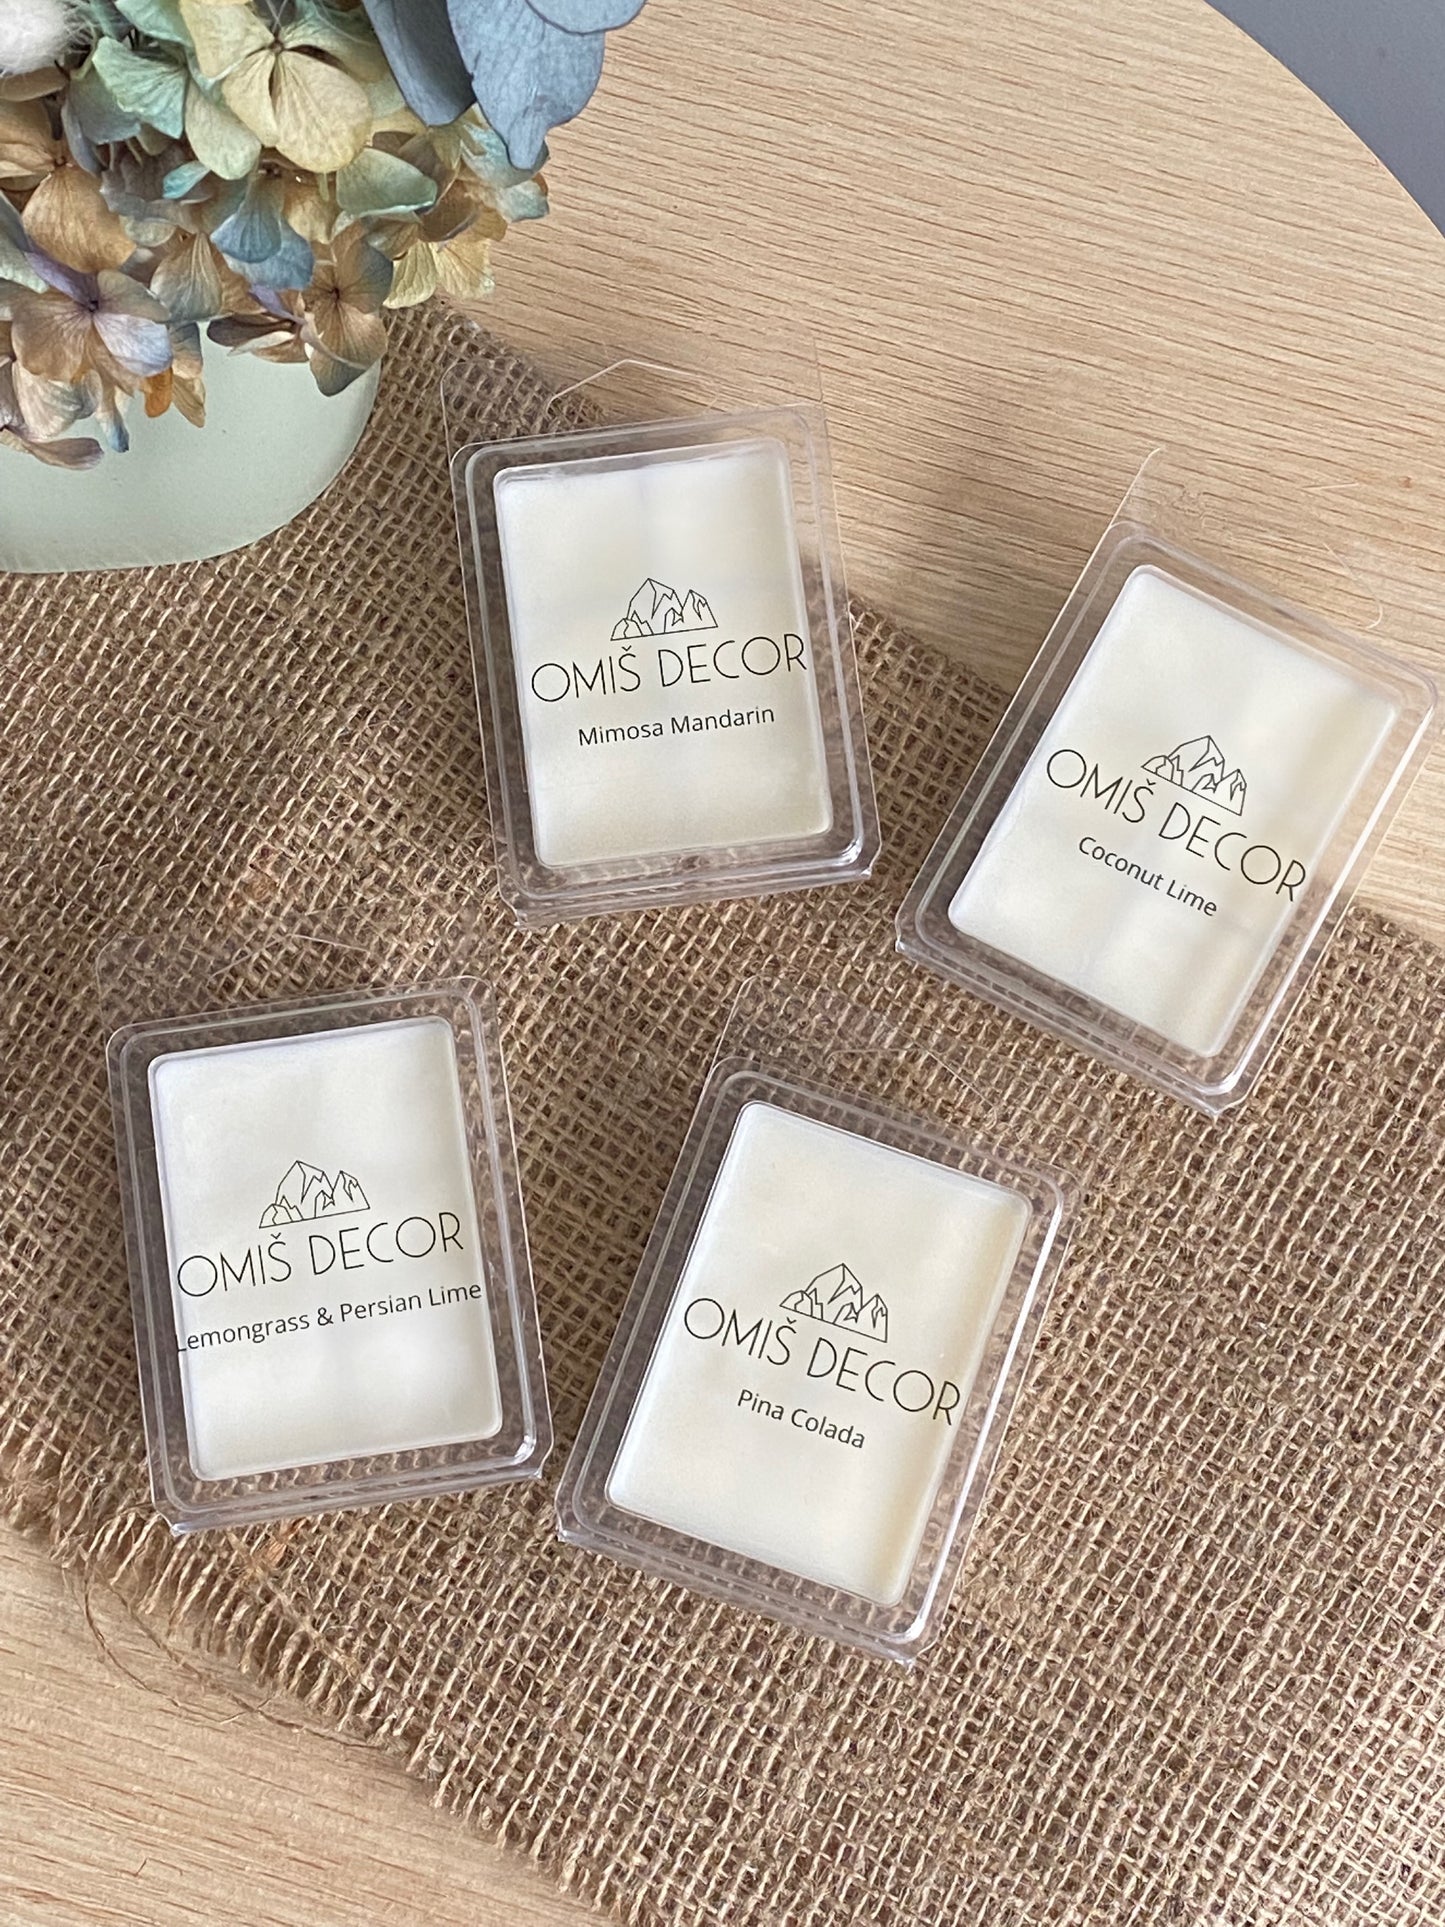  Our wax melts are the best way to sample all our delicious fragrances. One pack of melts last for 50 hours.